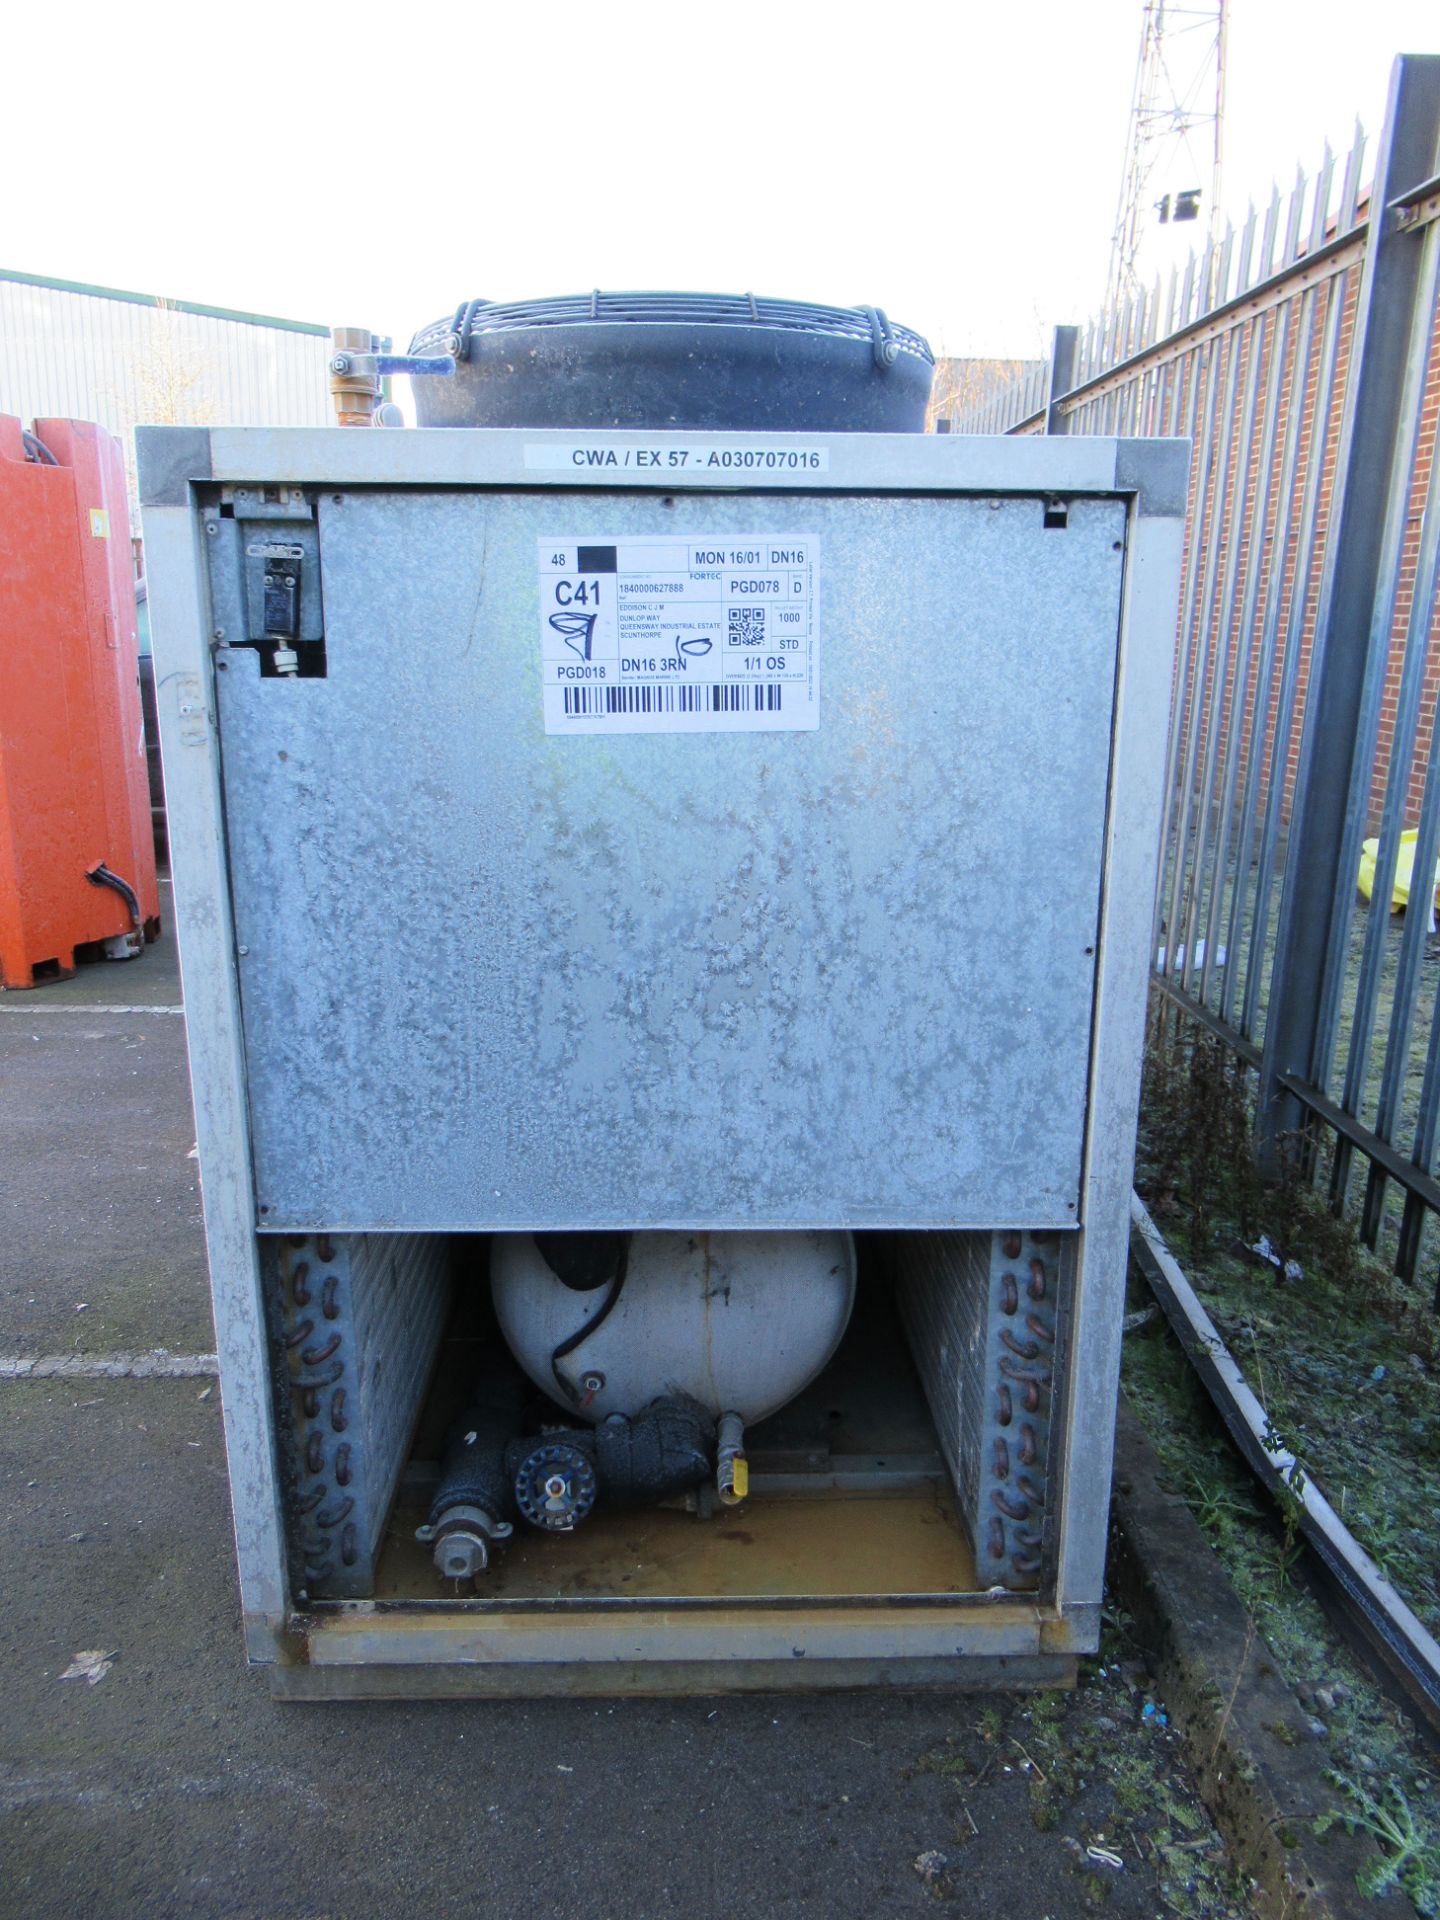 Rhoss industrial water chiller, model number CWA/EX57,66 kW cooling capacity - Image 4 of 14